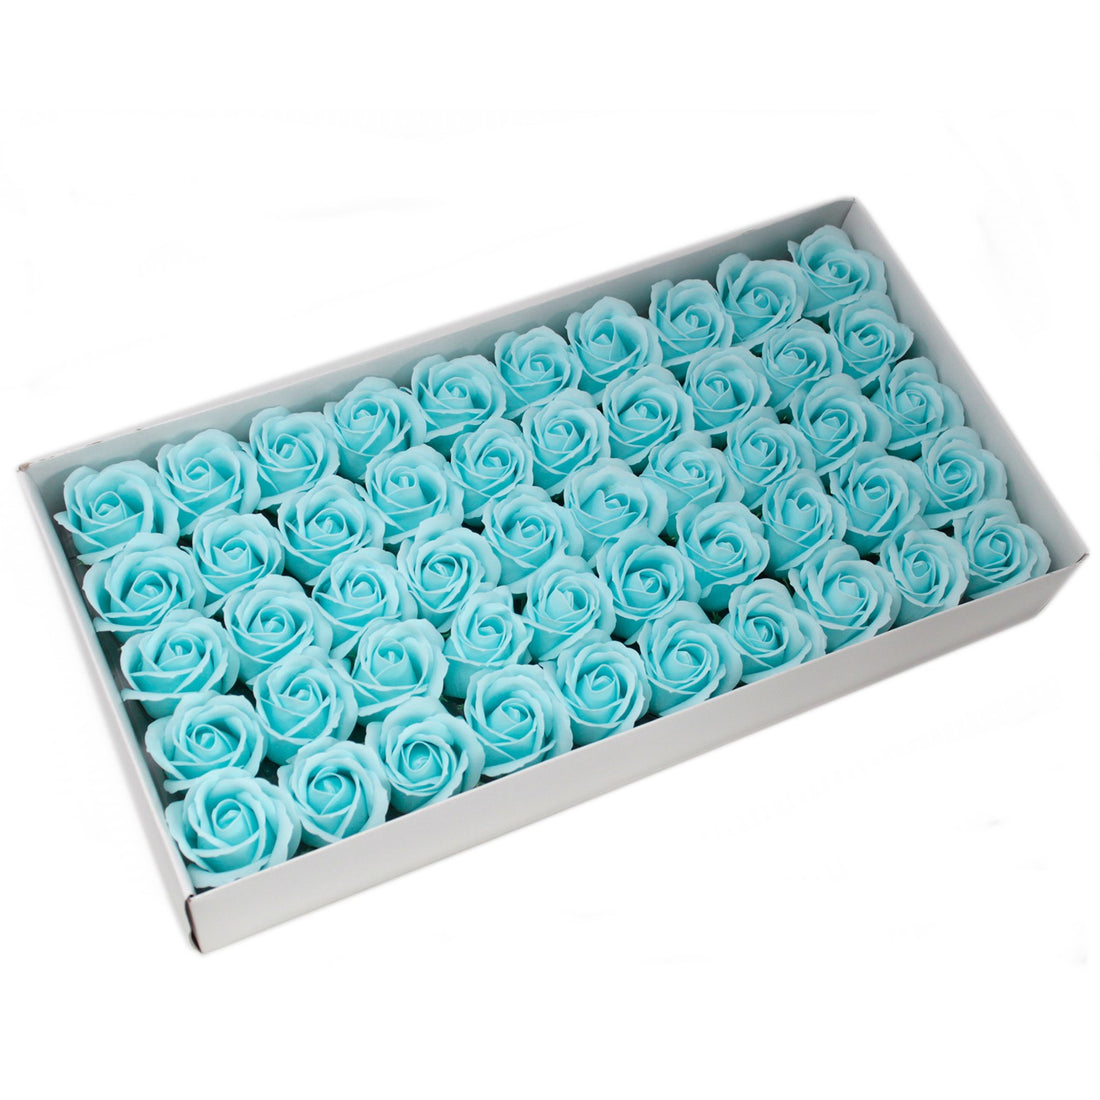 Craft Soap Flowers - Med Rose - Baby Blue x 10 pcs